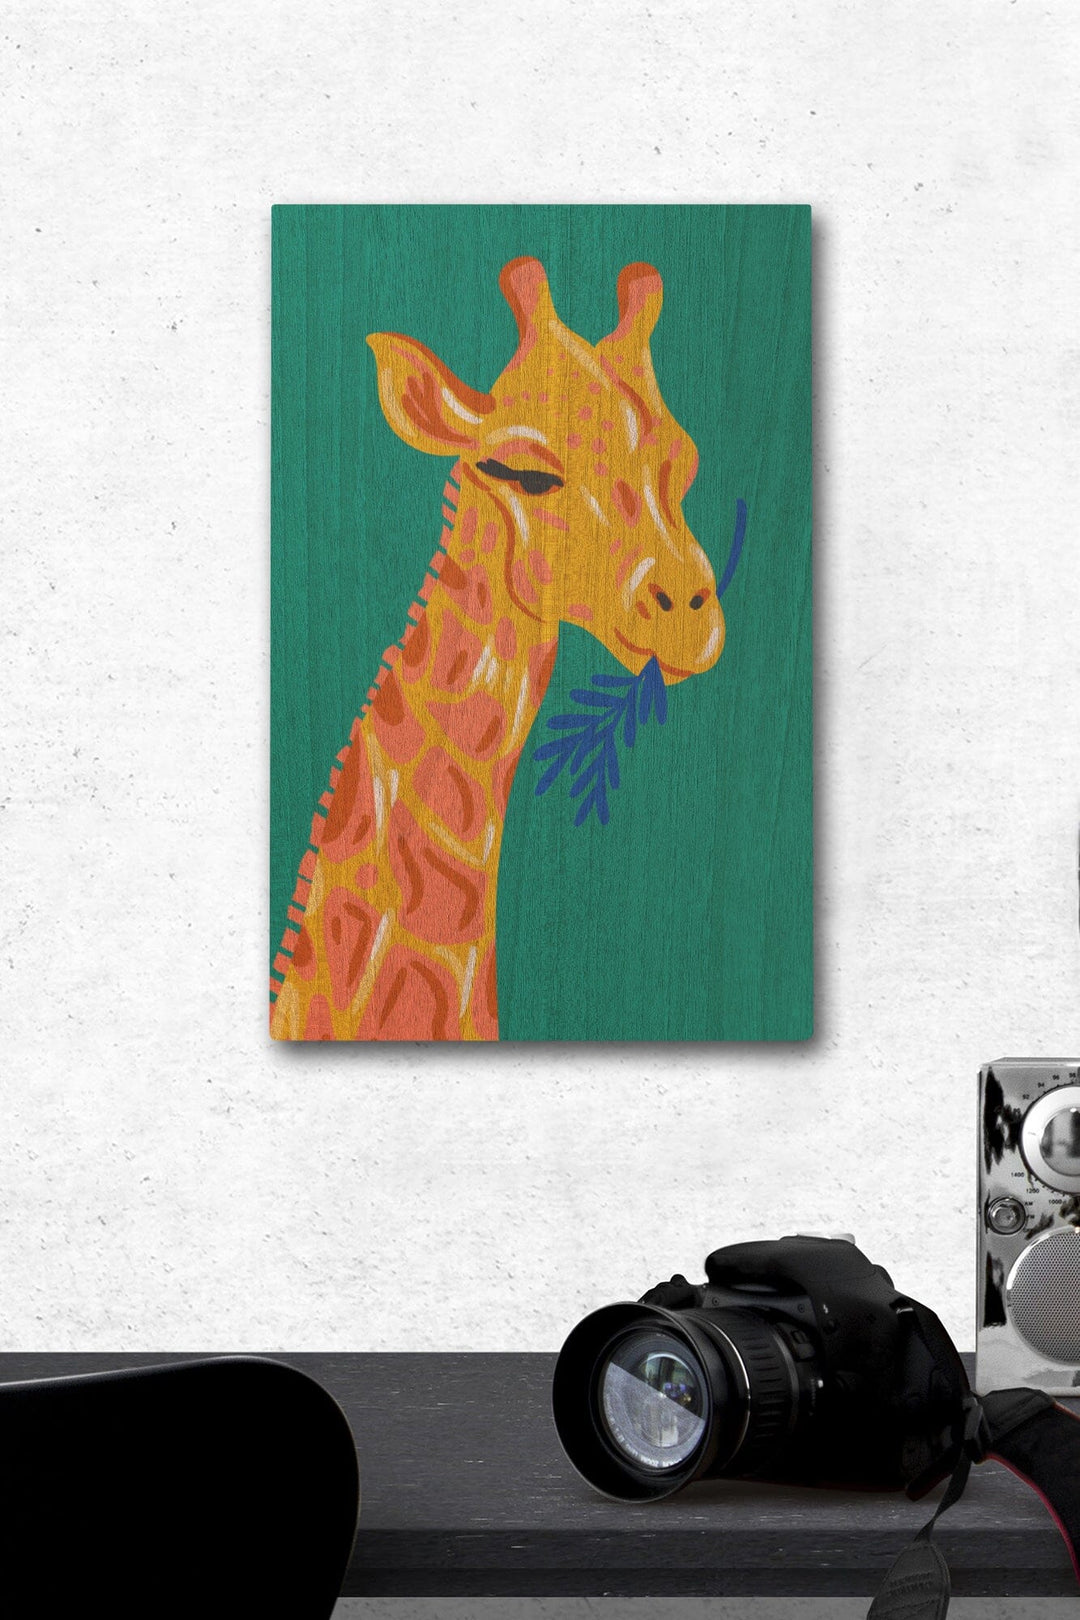 Lush Environment Collection, Giraffe Portrait, Wood Signs and Postcards Wood Lantern Press 12 x 18 Wood Gallery Print 